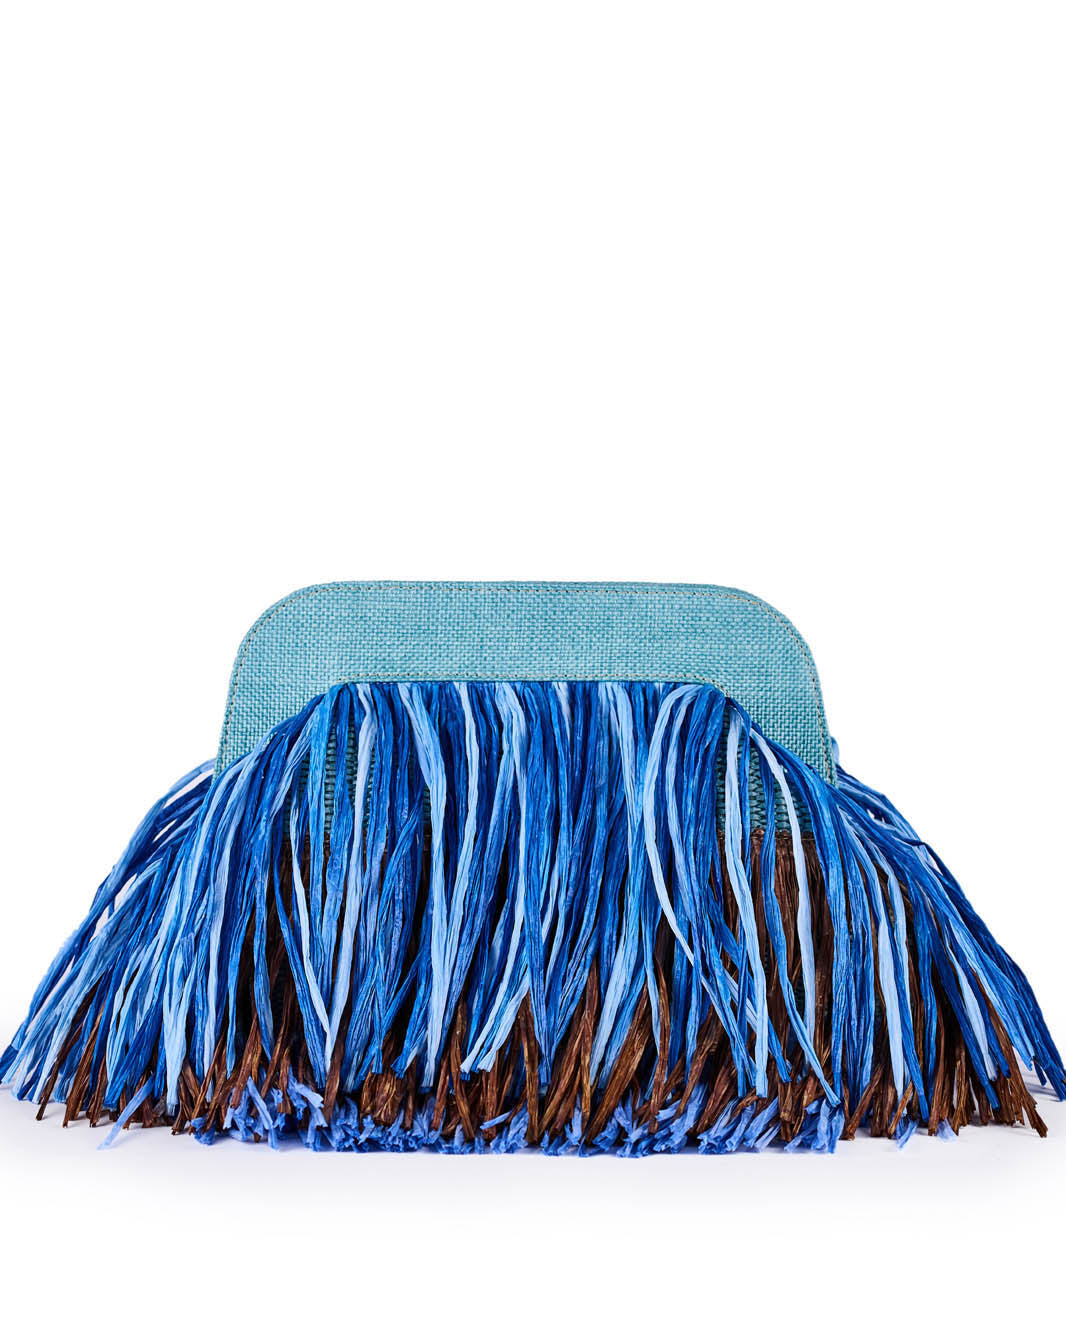 Blue and brown fringed clutch bag with textured fabric